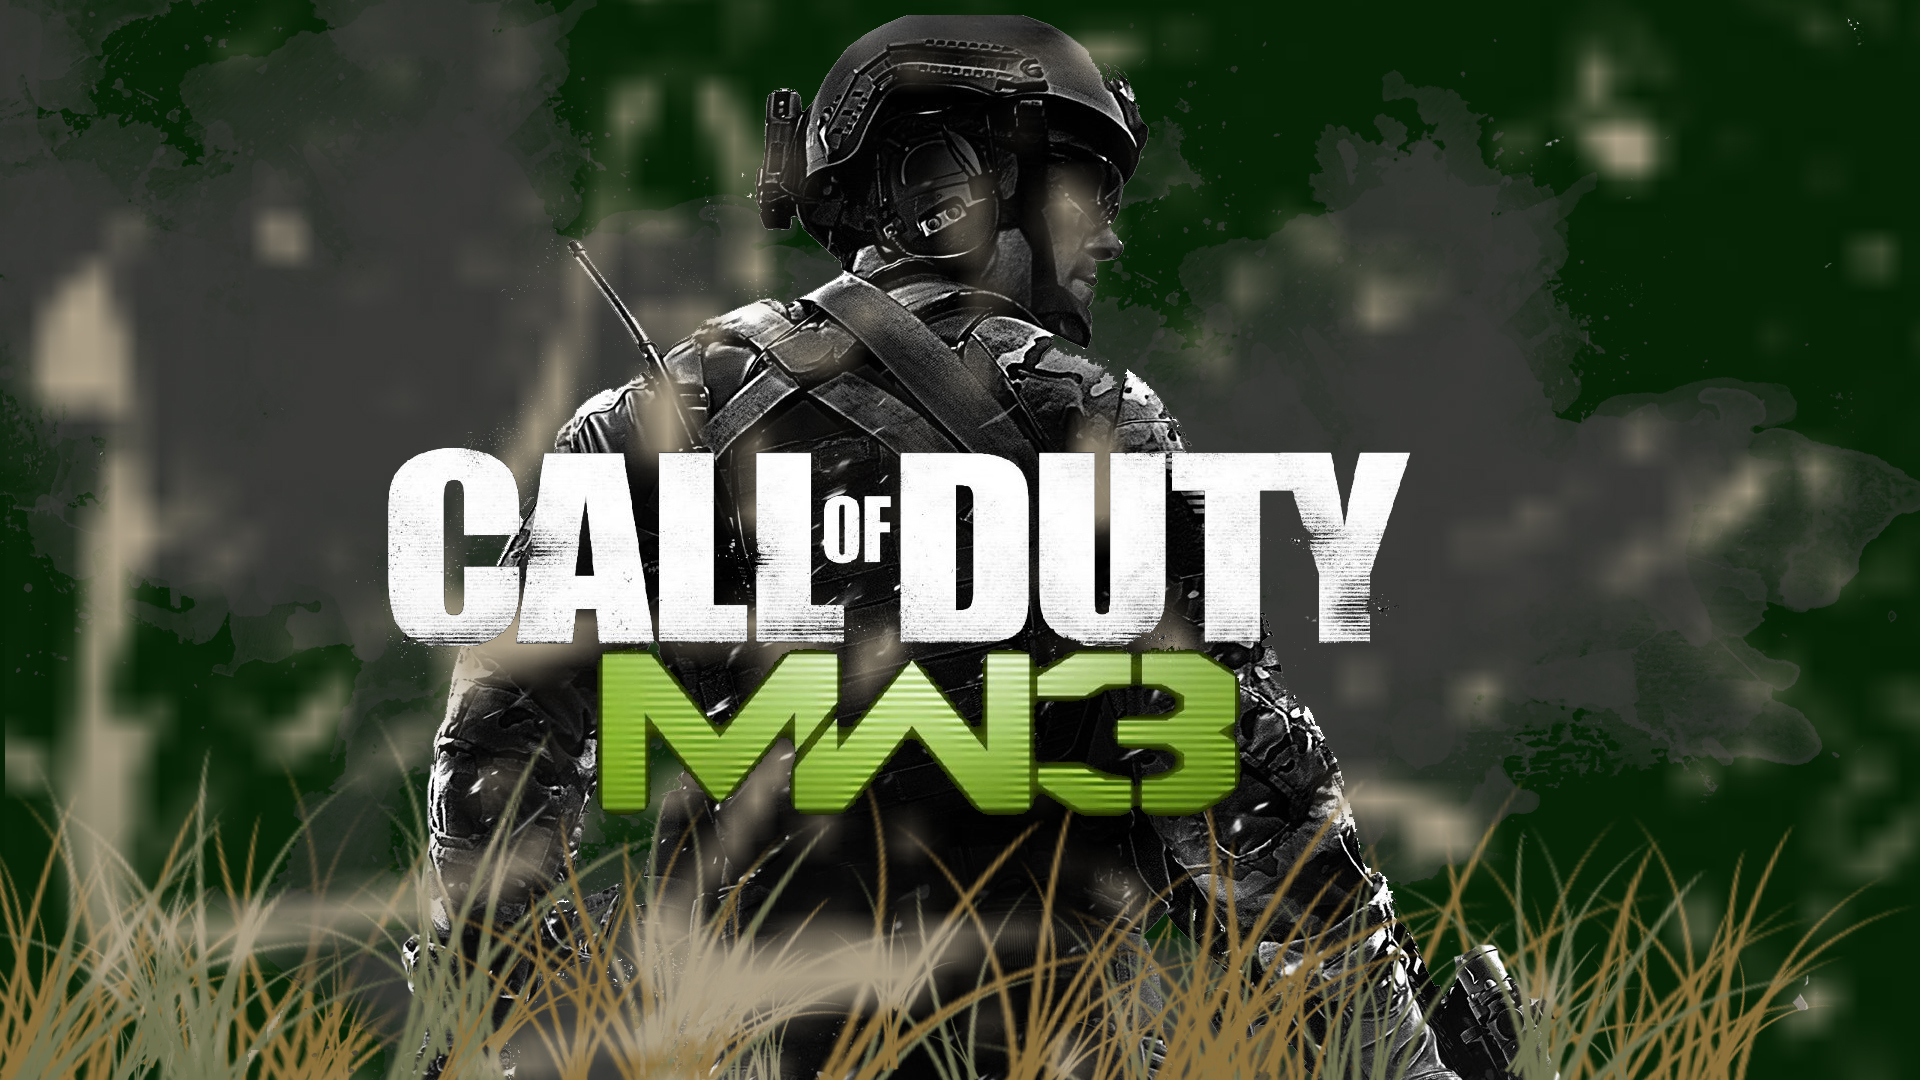 Mw3 Cod Wallpaper For Desktop And Mobile Devicesmw3 1366x768jpg